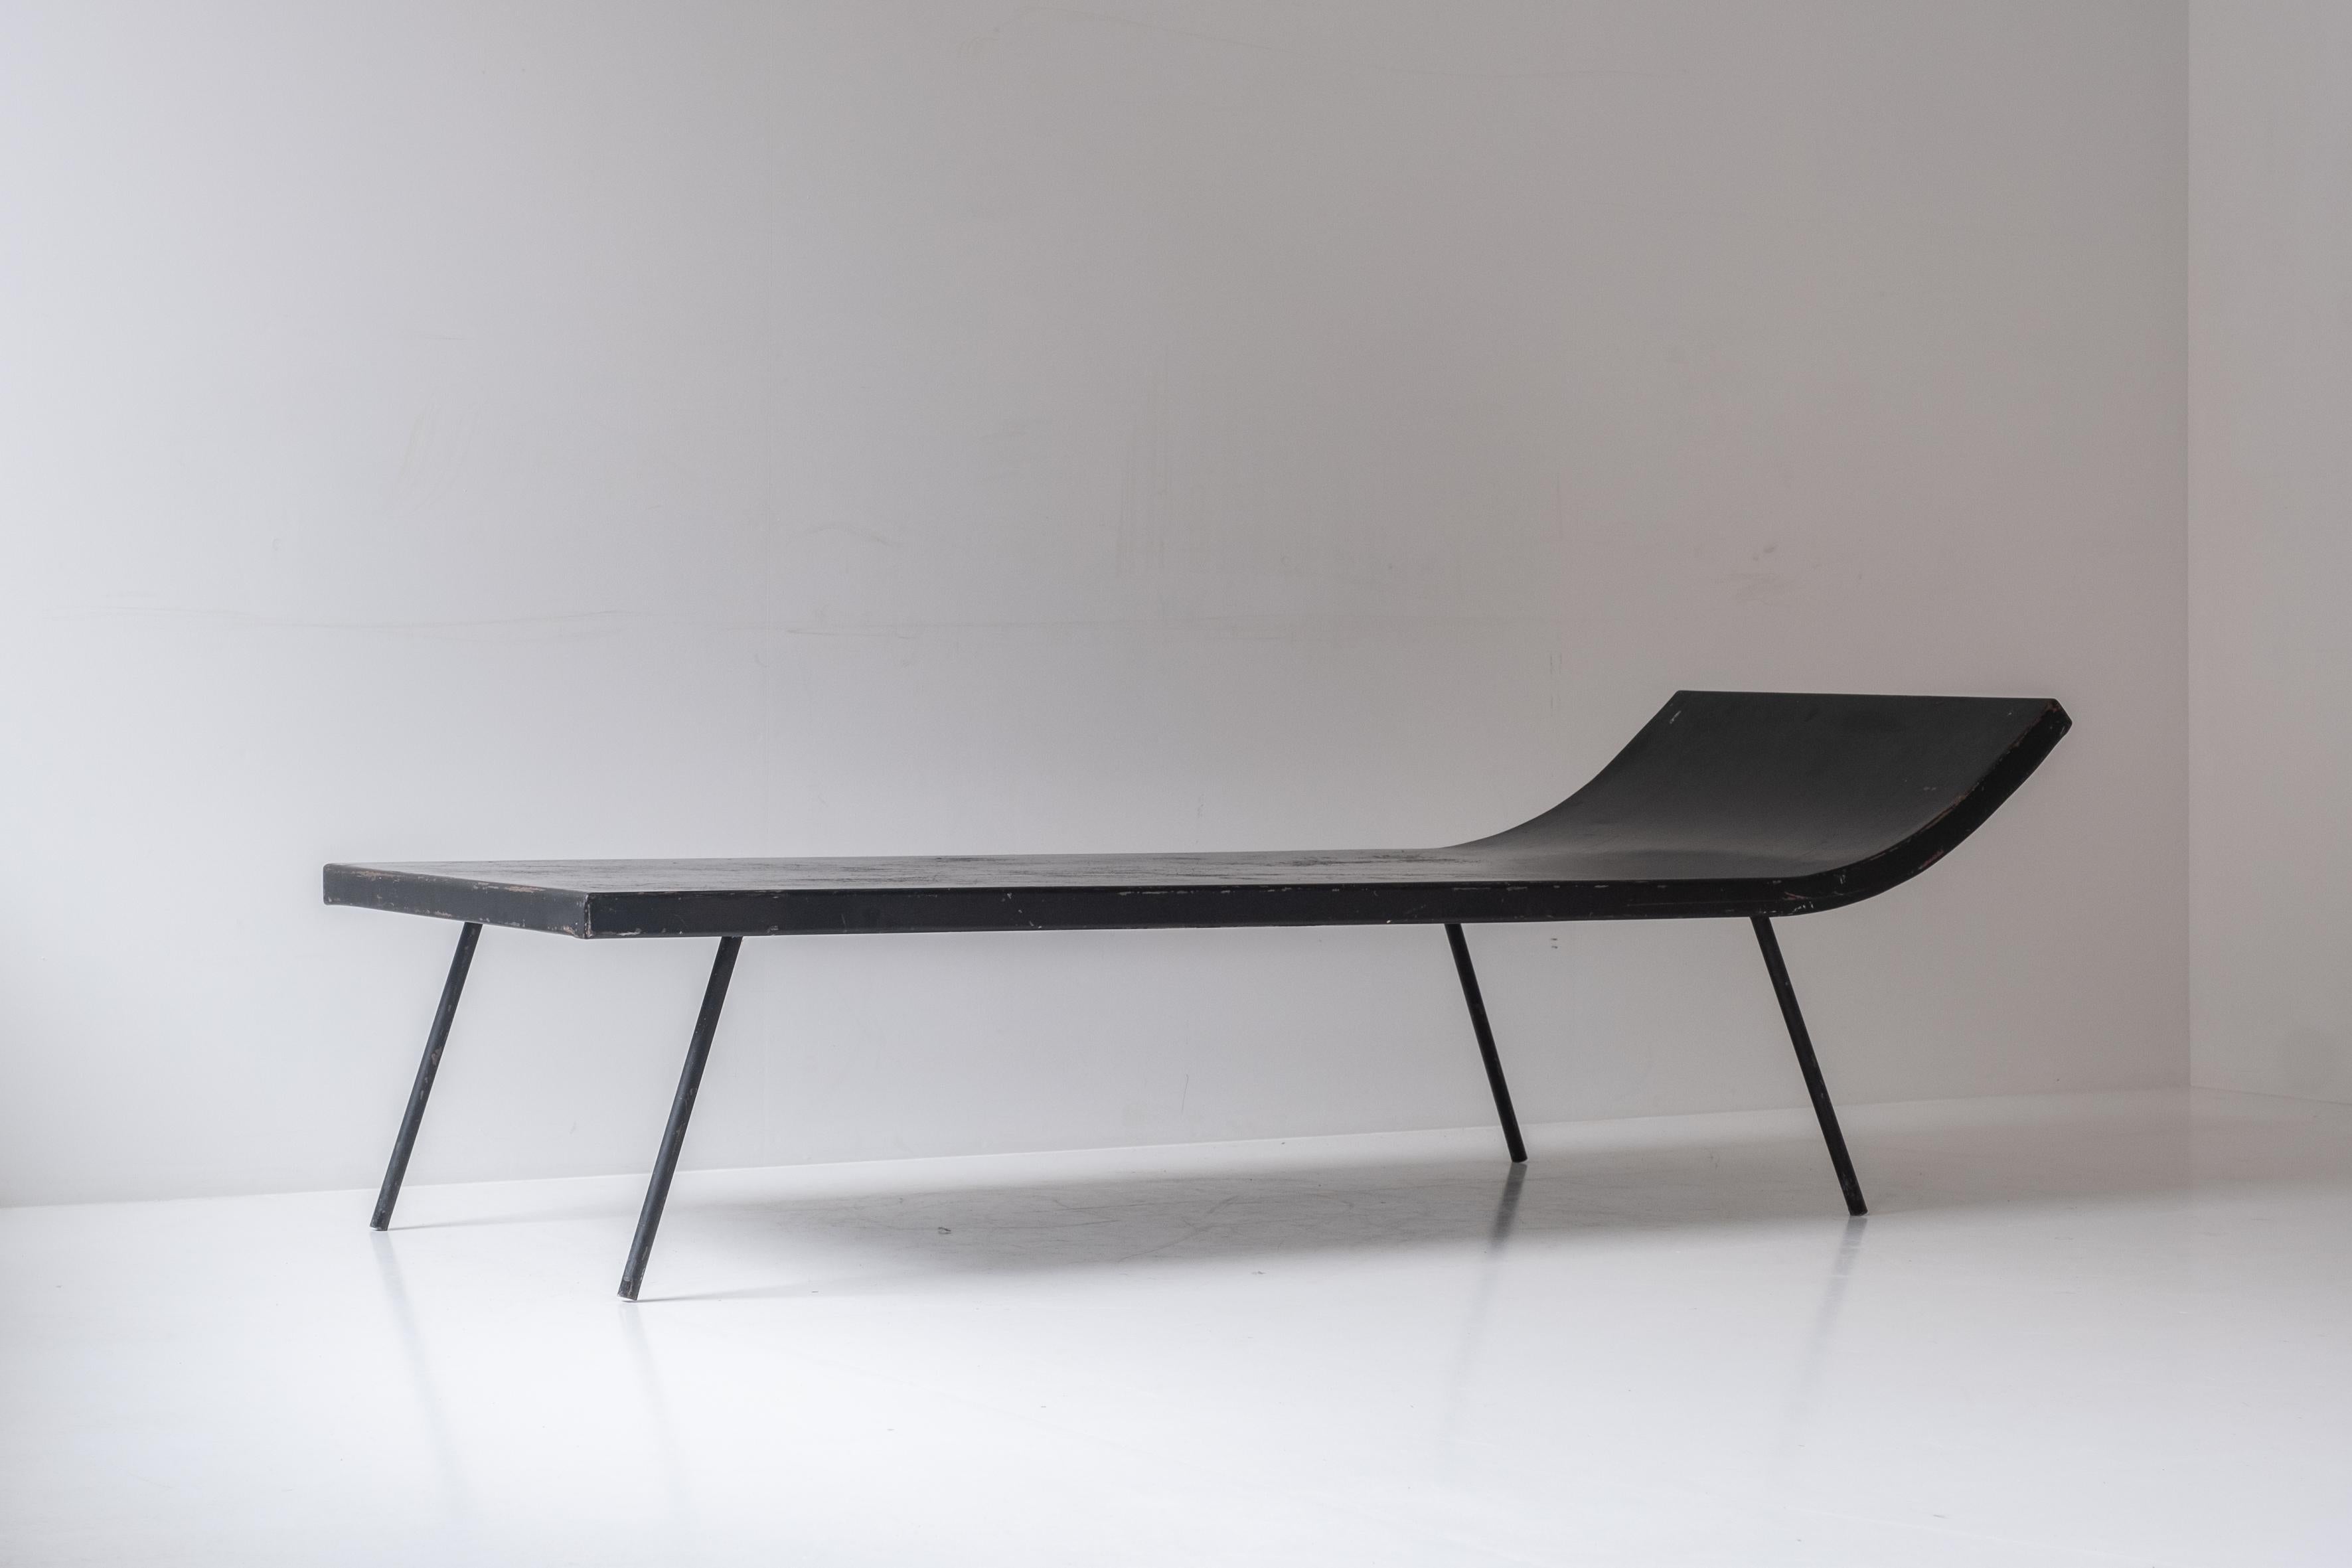 Metal daybed designed and manufactured during the 1950s. This decorative and functional daybed is made out of black lacquered metal. Presented in its original condition with visible signs of age and use. Designer (for know) unknown.